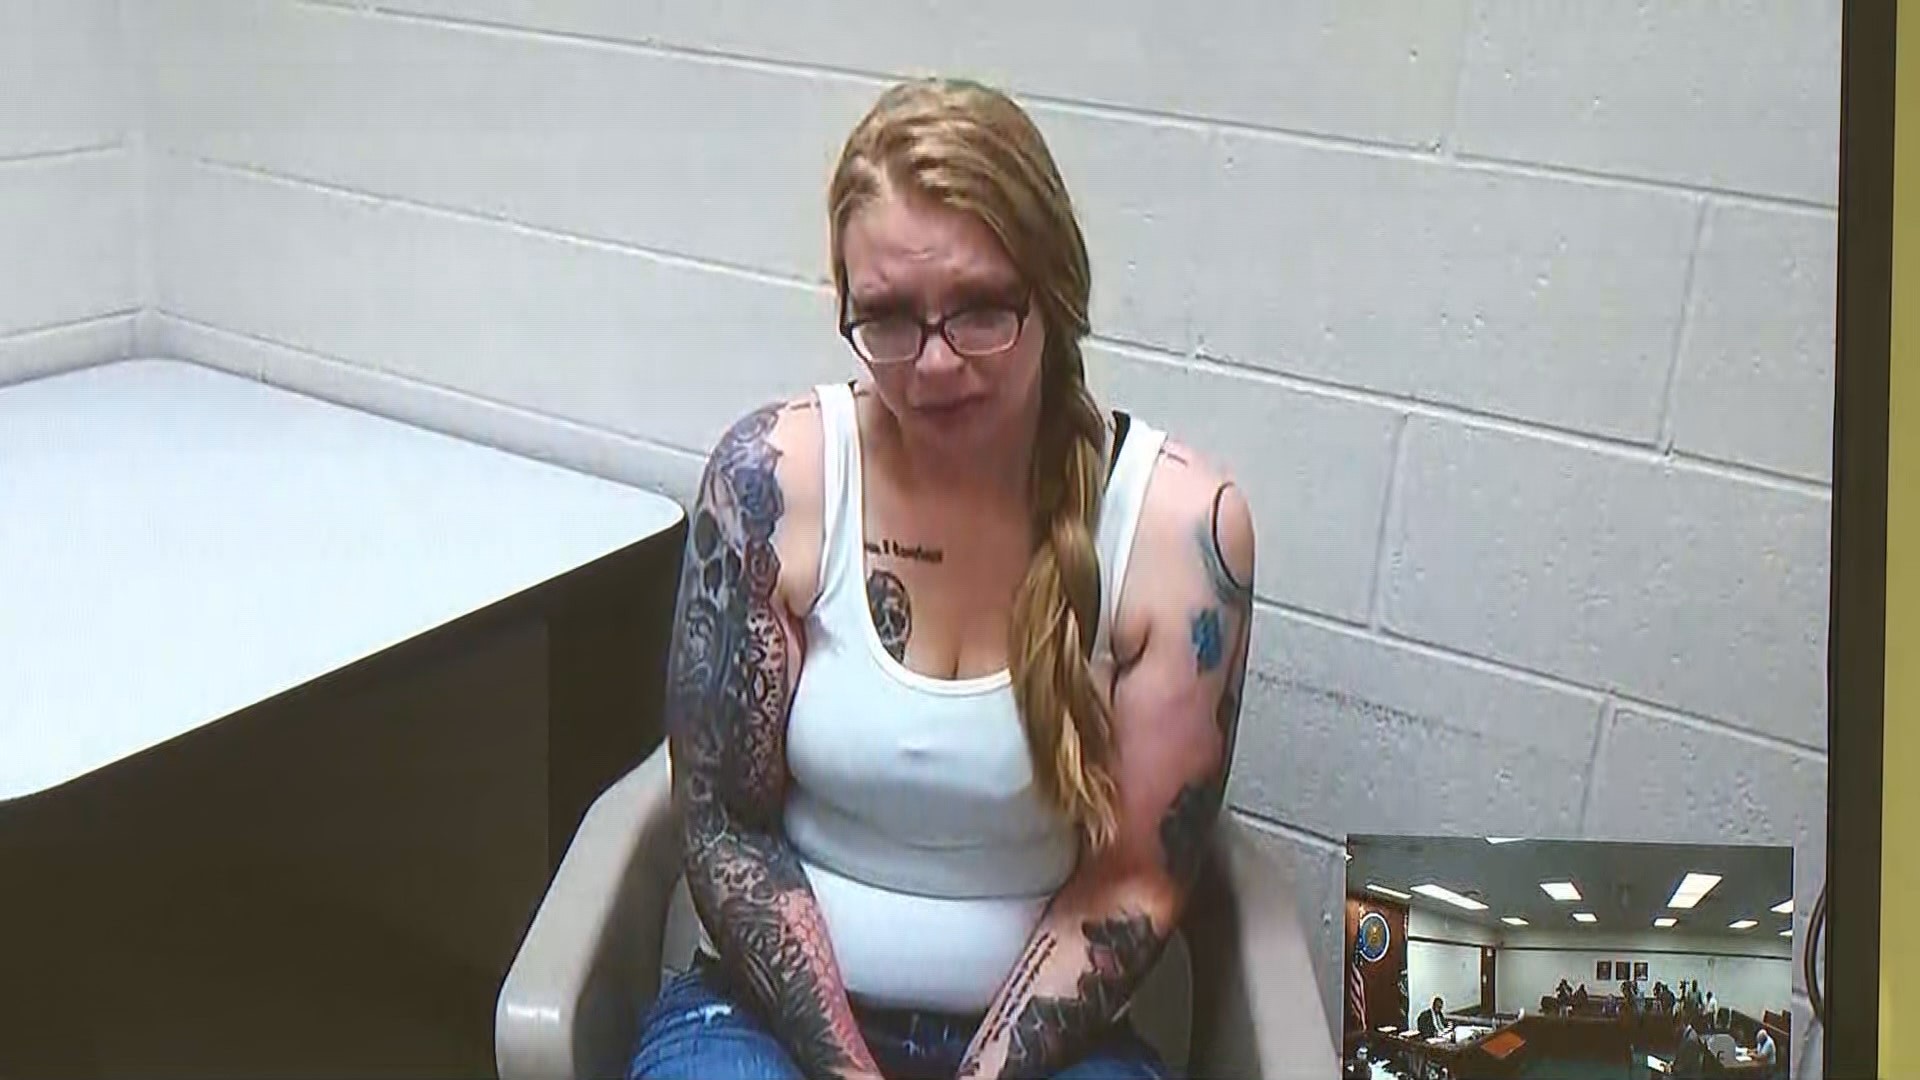 Brandy Jones was arraigned on three charges related to a fatal hit-and-run crash in Montcalm County that killed one teenager and injured two others.